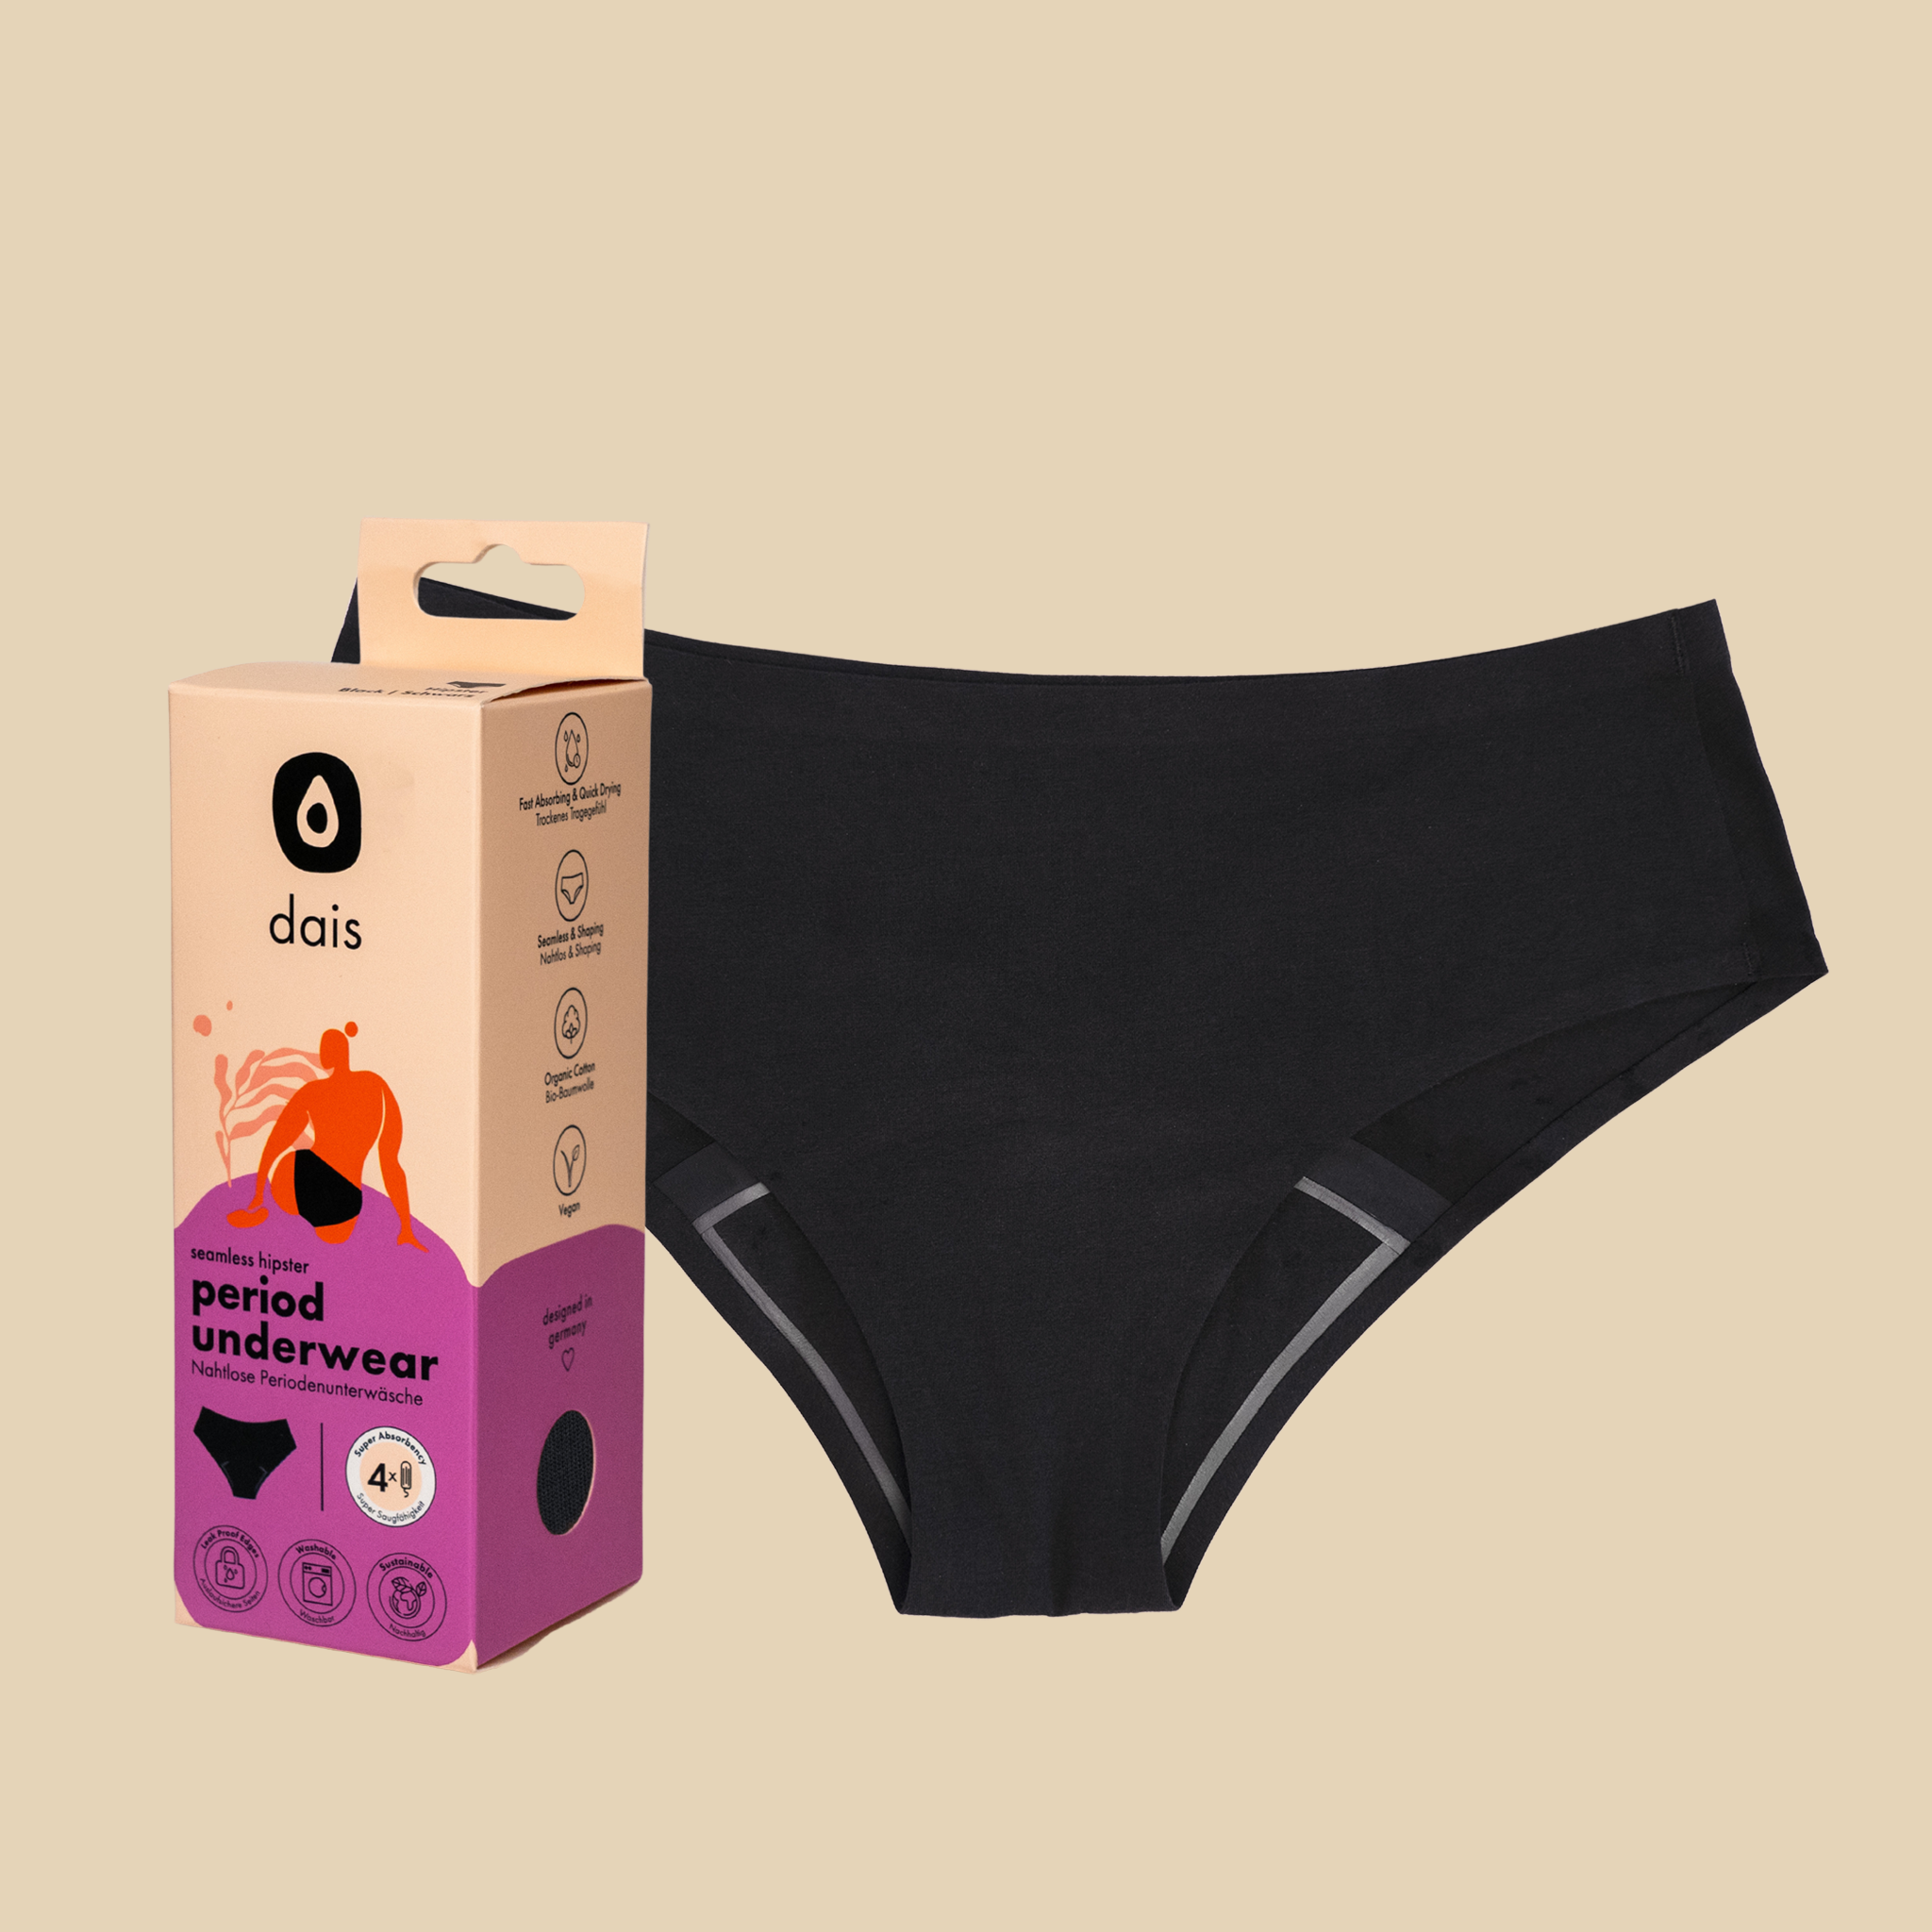 dais period underwear in hipster cut in black with modern packaging.